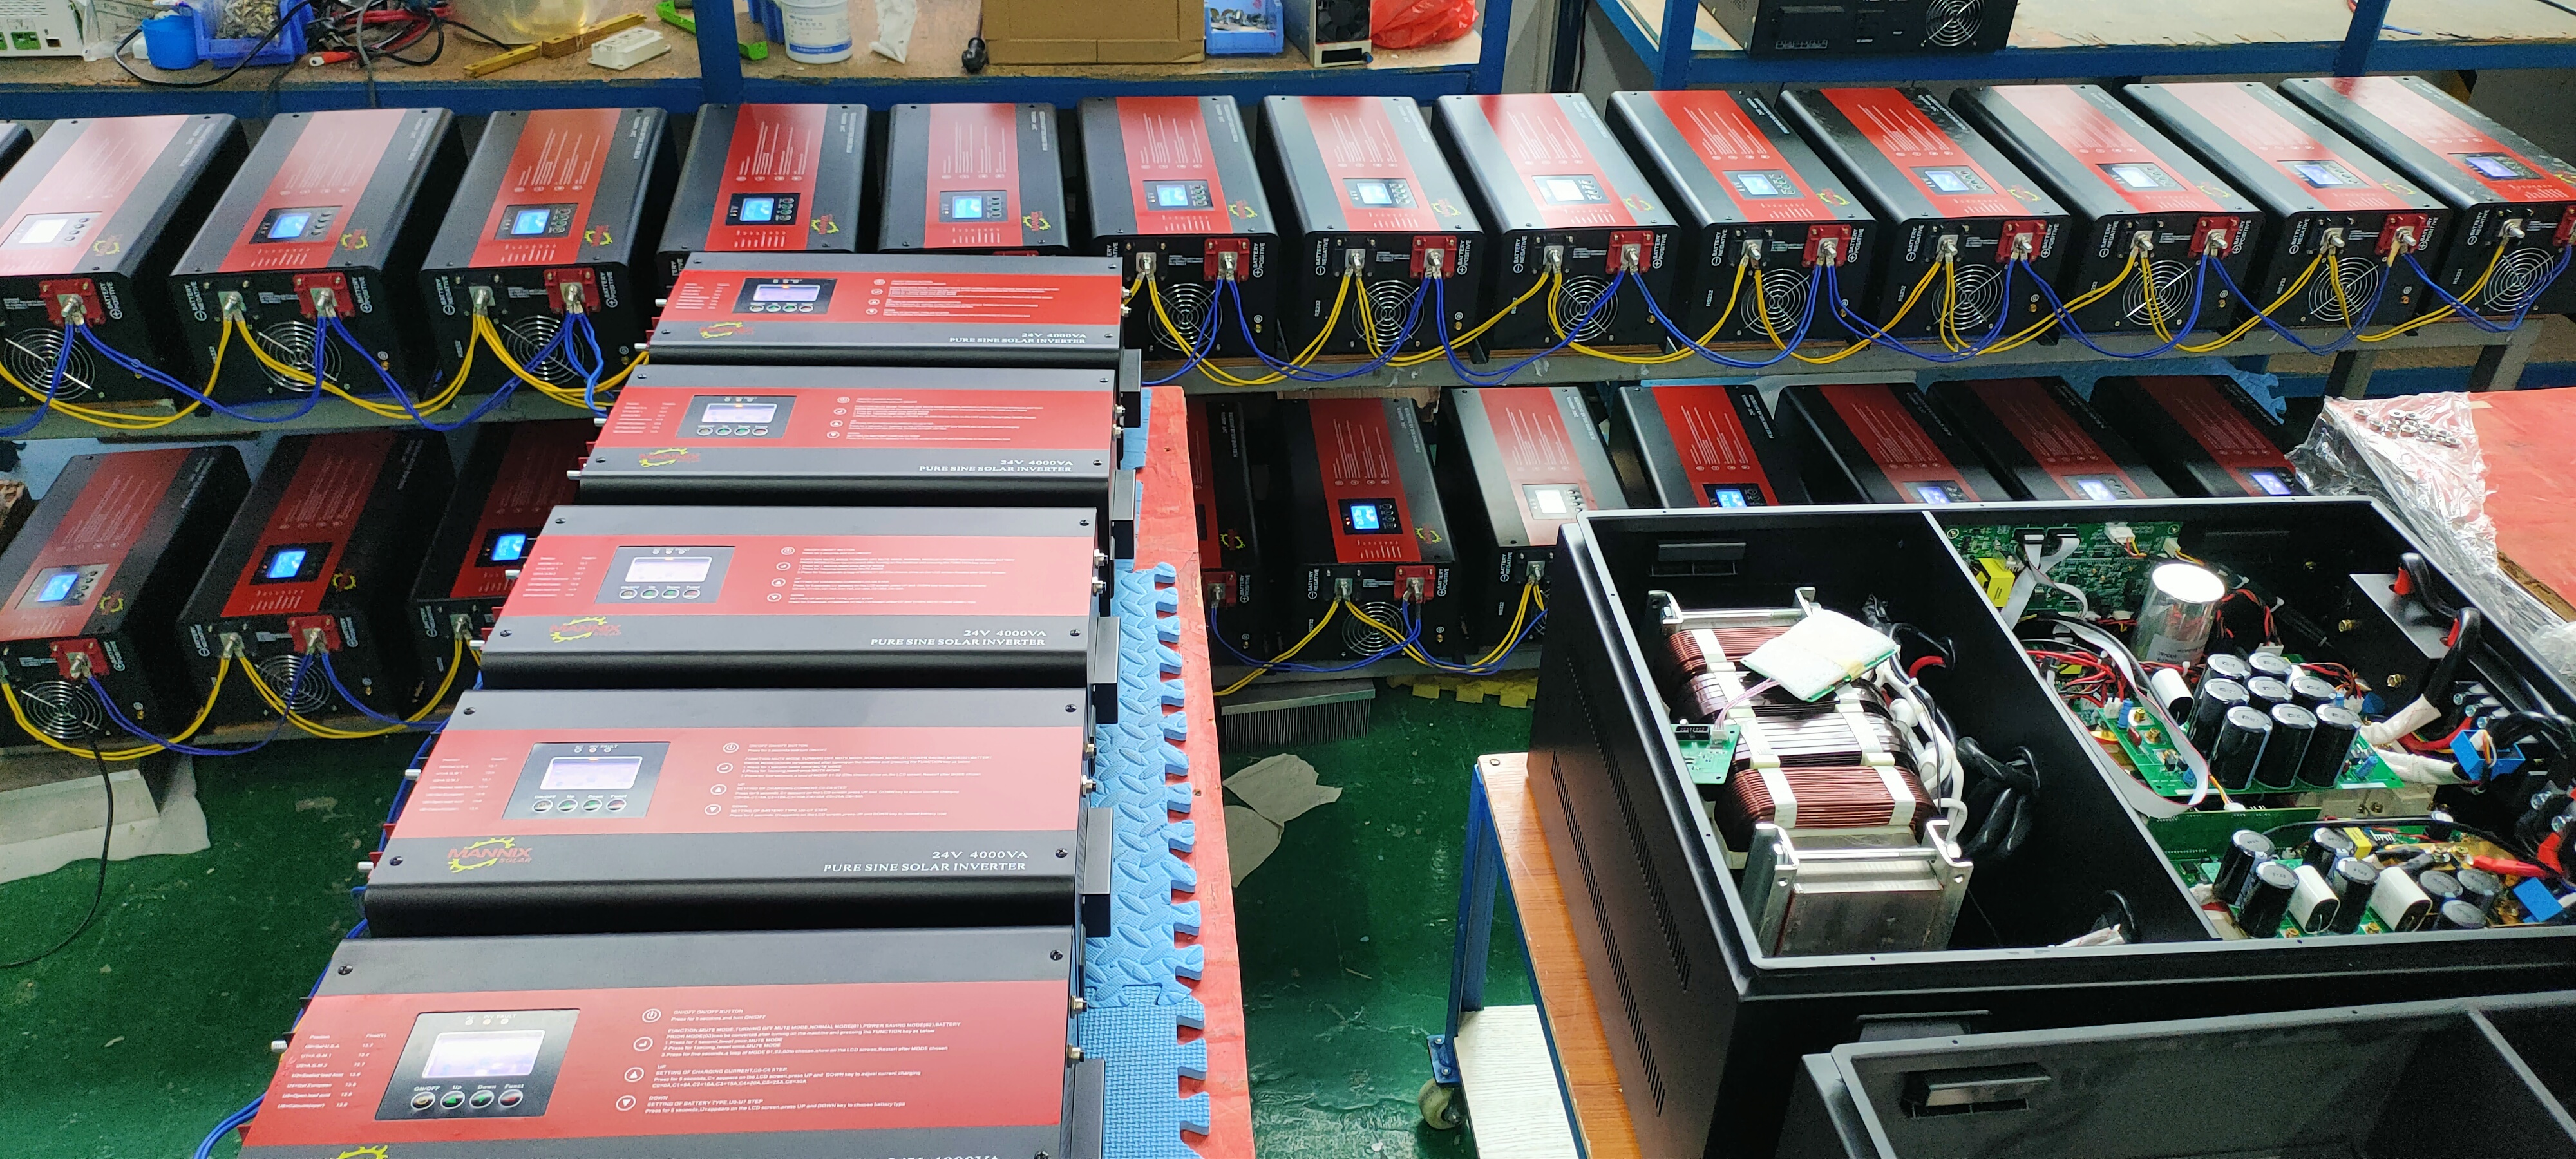 The end of manufacturing of the high quality inverter and the start of shipping